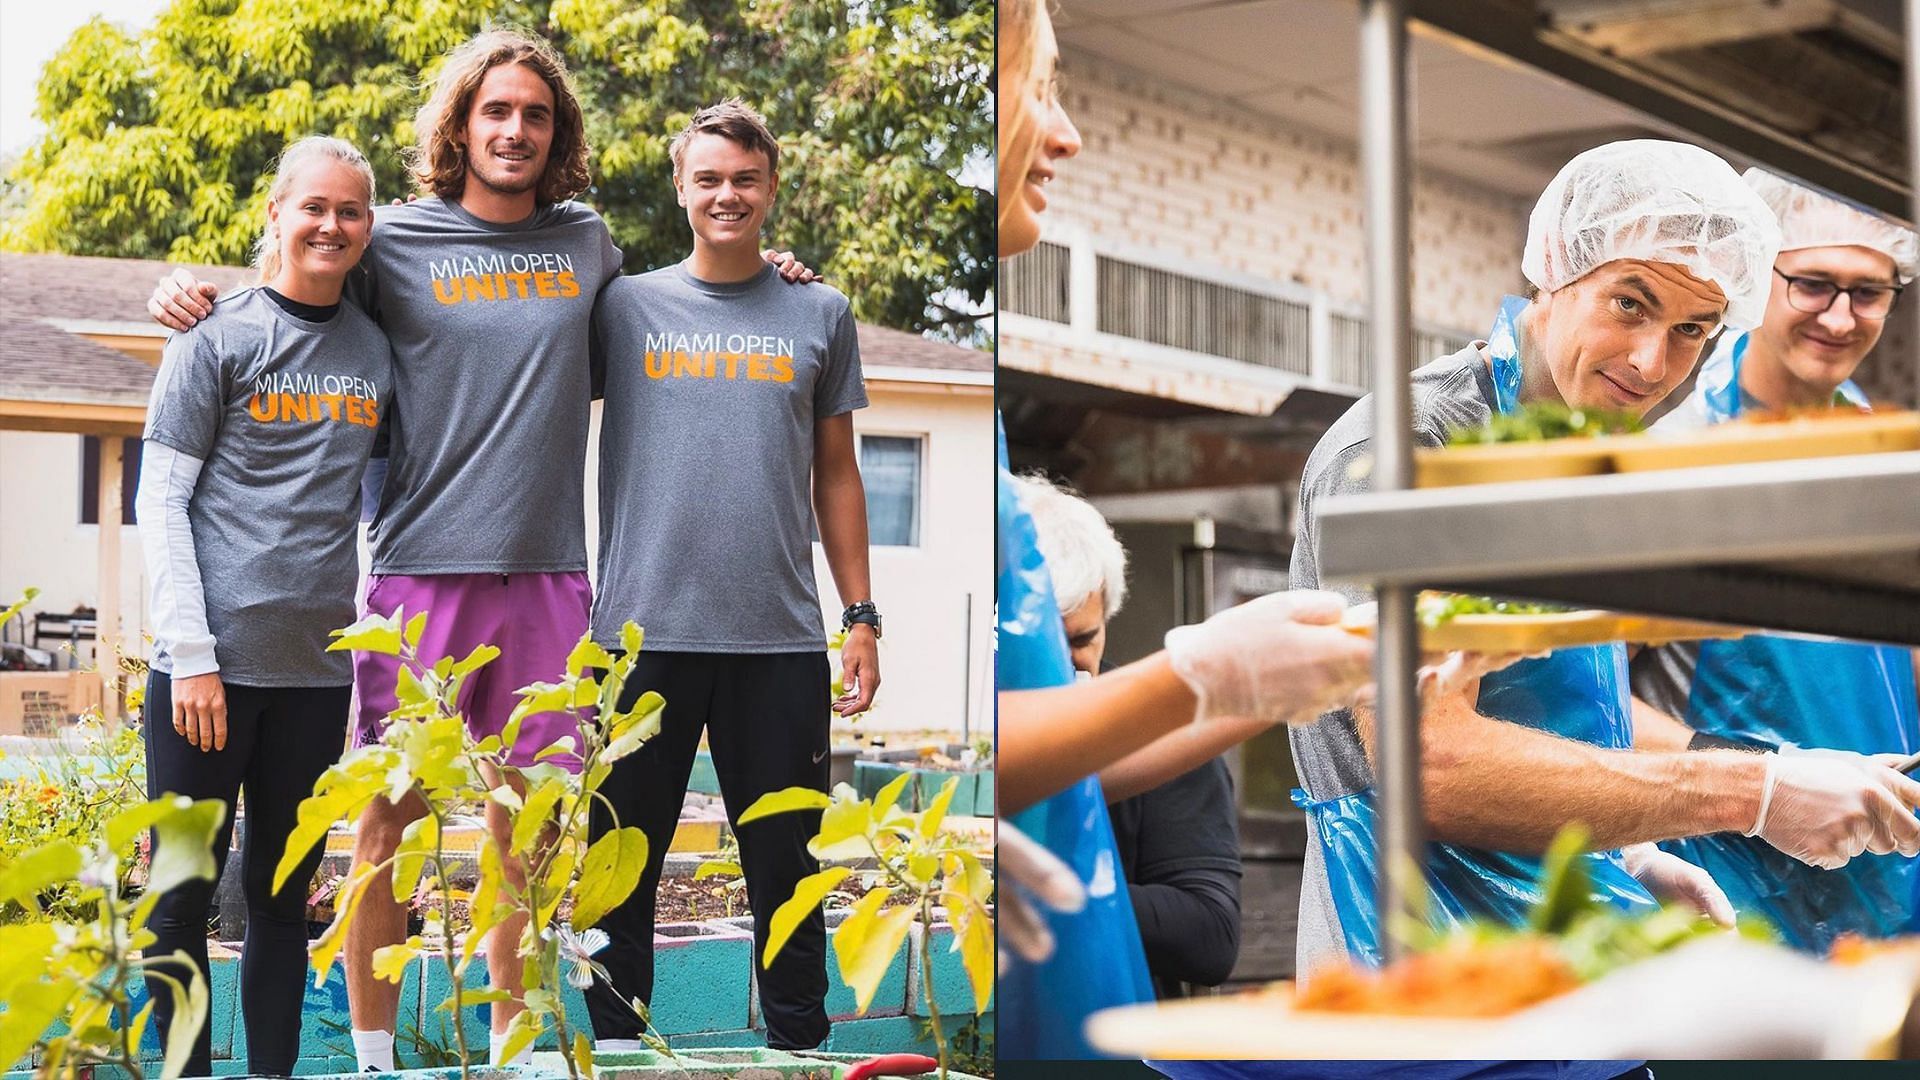 Stefanos Tsitsipas and Andy Murray for the Miami Open Unites initiative